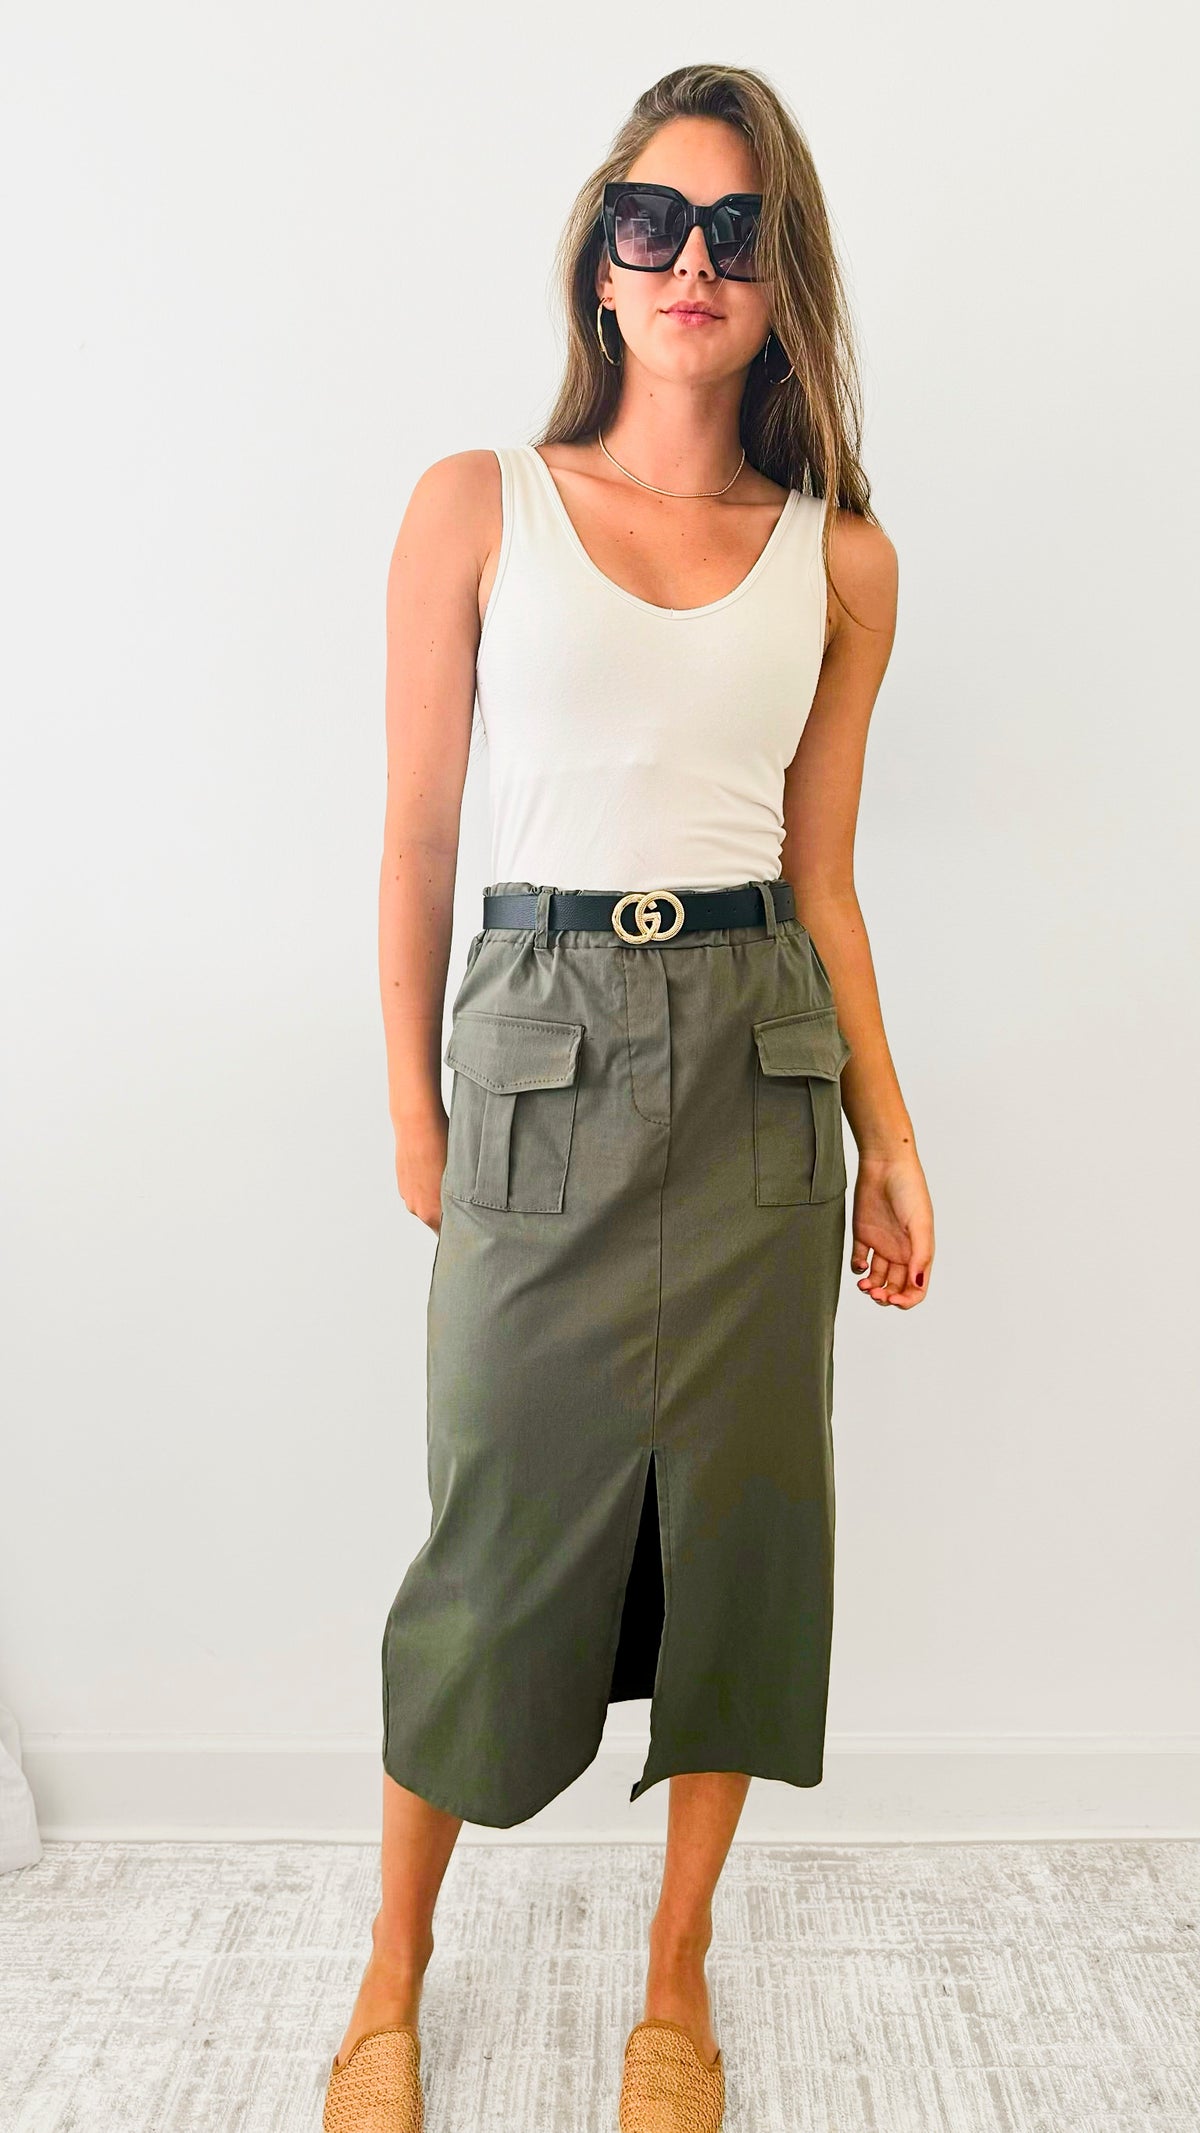 Urban Explorer Italian Skirt - Army Green-170 Bottoms-Germany-Coastal Bloom Boutique, find the trendiest versions of the popular styles and looks Located in Indialantic, FL